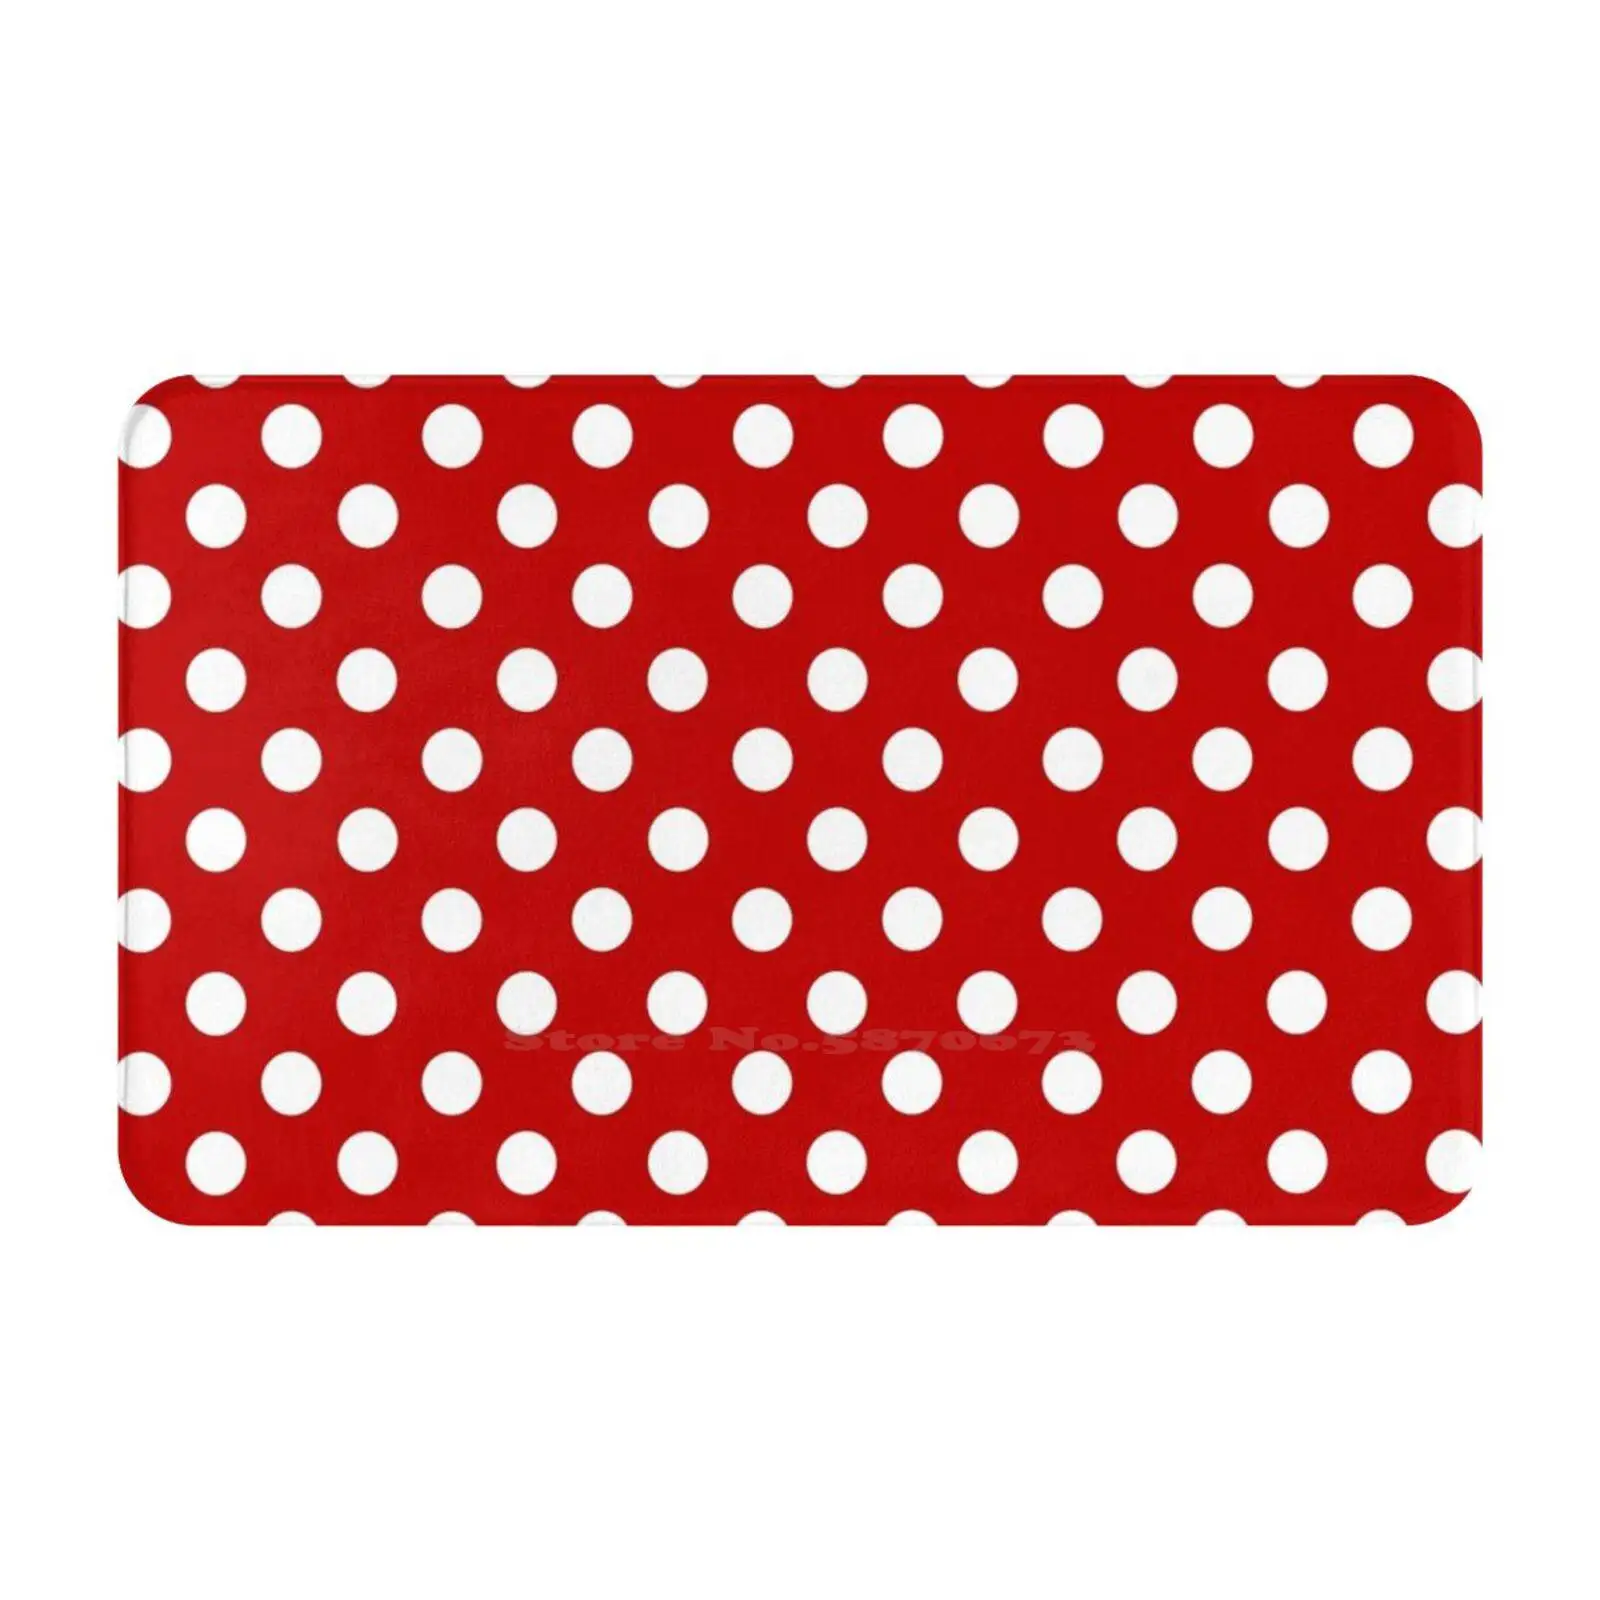 

Red With White Polka Dots Door Mat Foot Pad Home Rug Simple Basic Pattern Black White Polka Dots Cute Girly Classic Old School